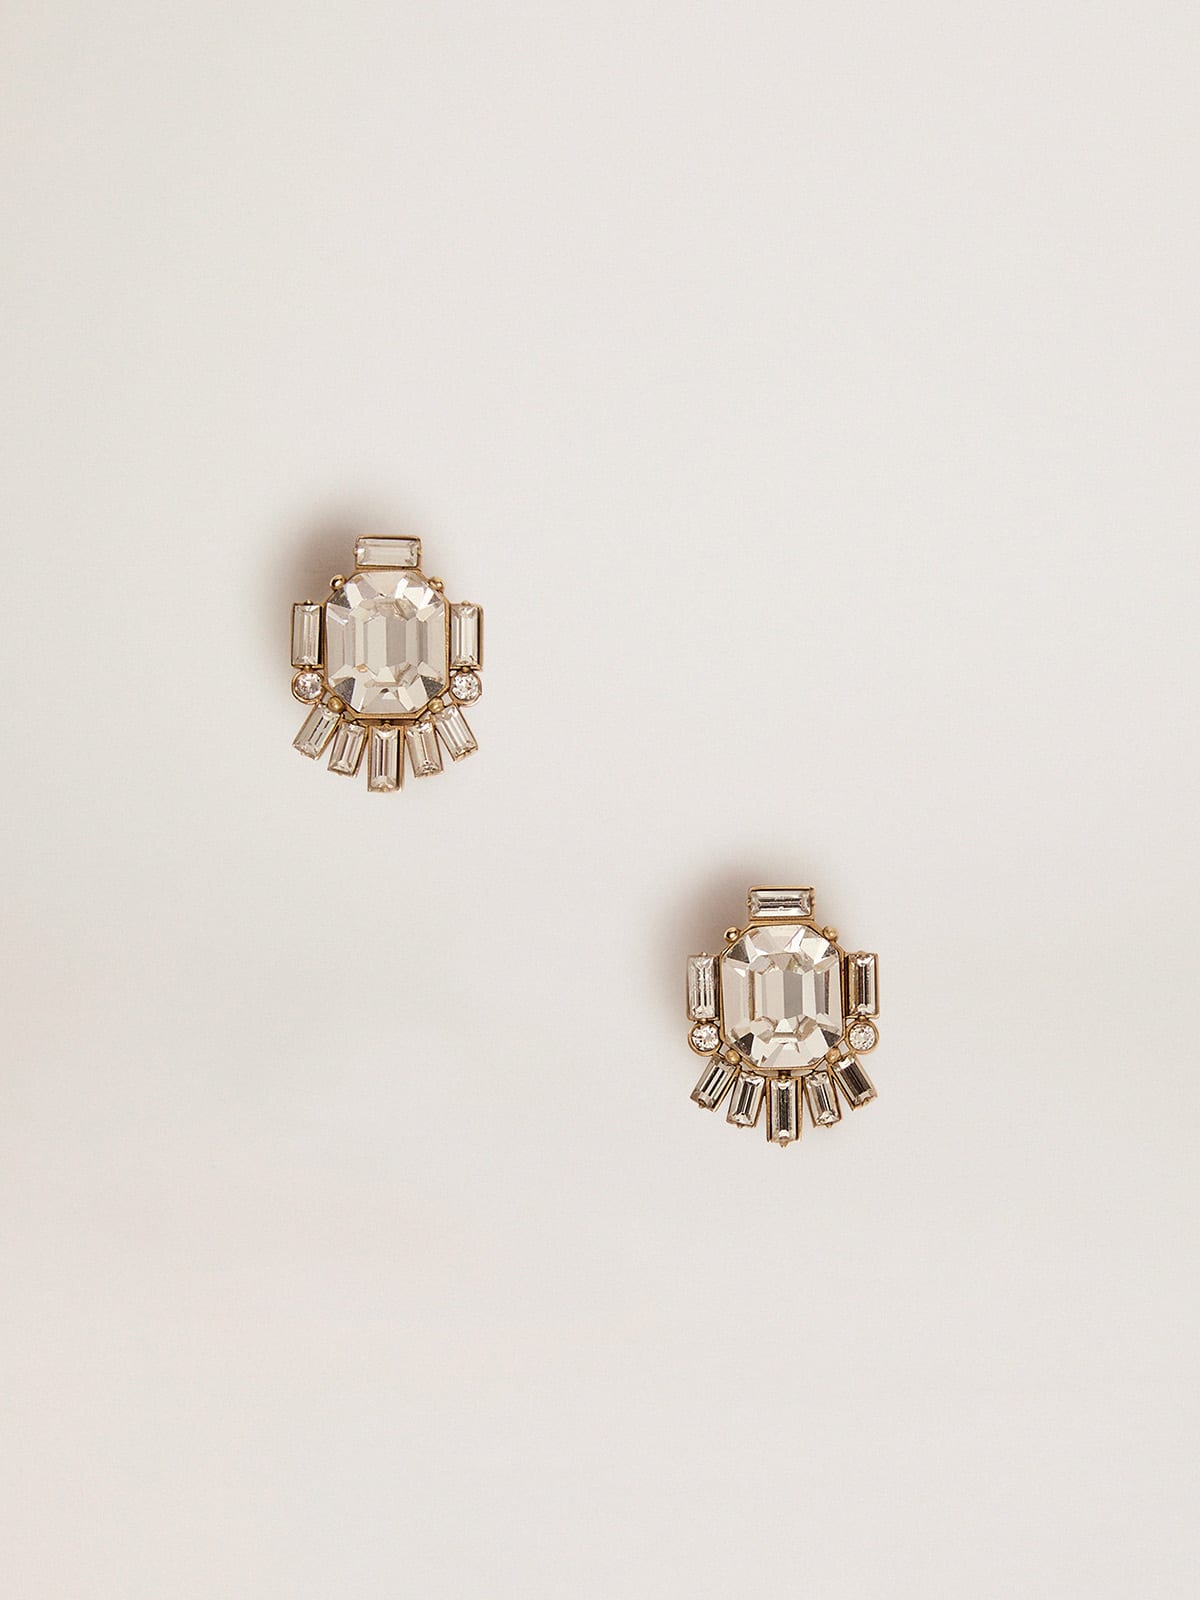 Golden Goose - Women's Déco stud earrings in antique gold color with crystals in 